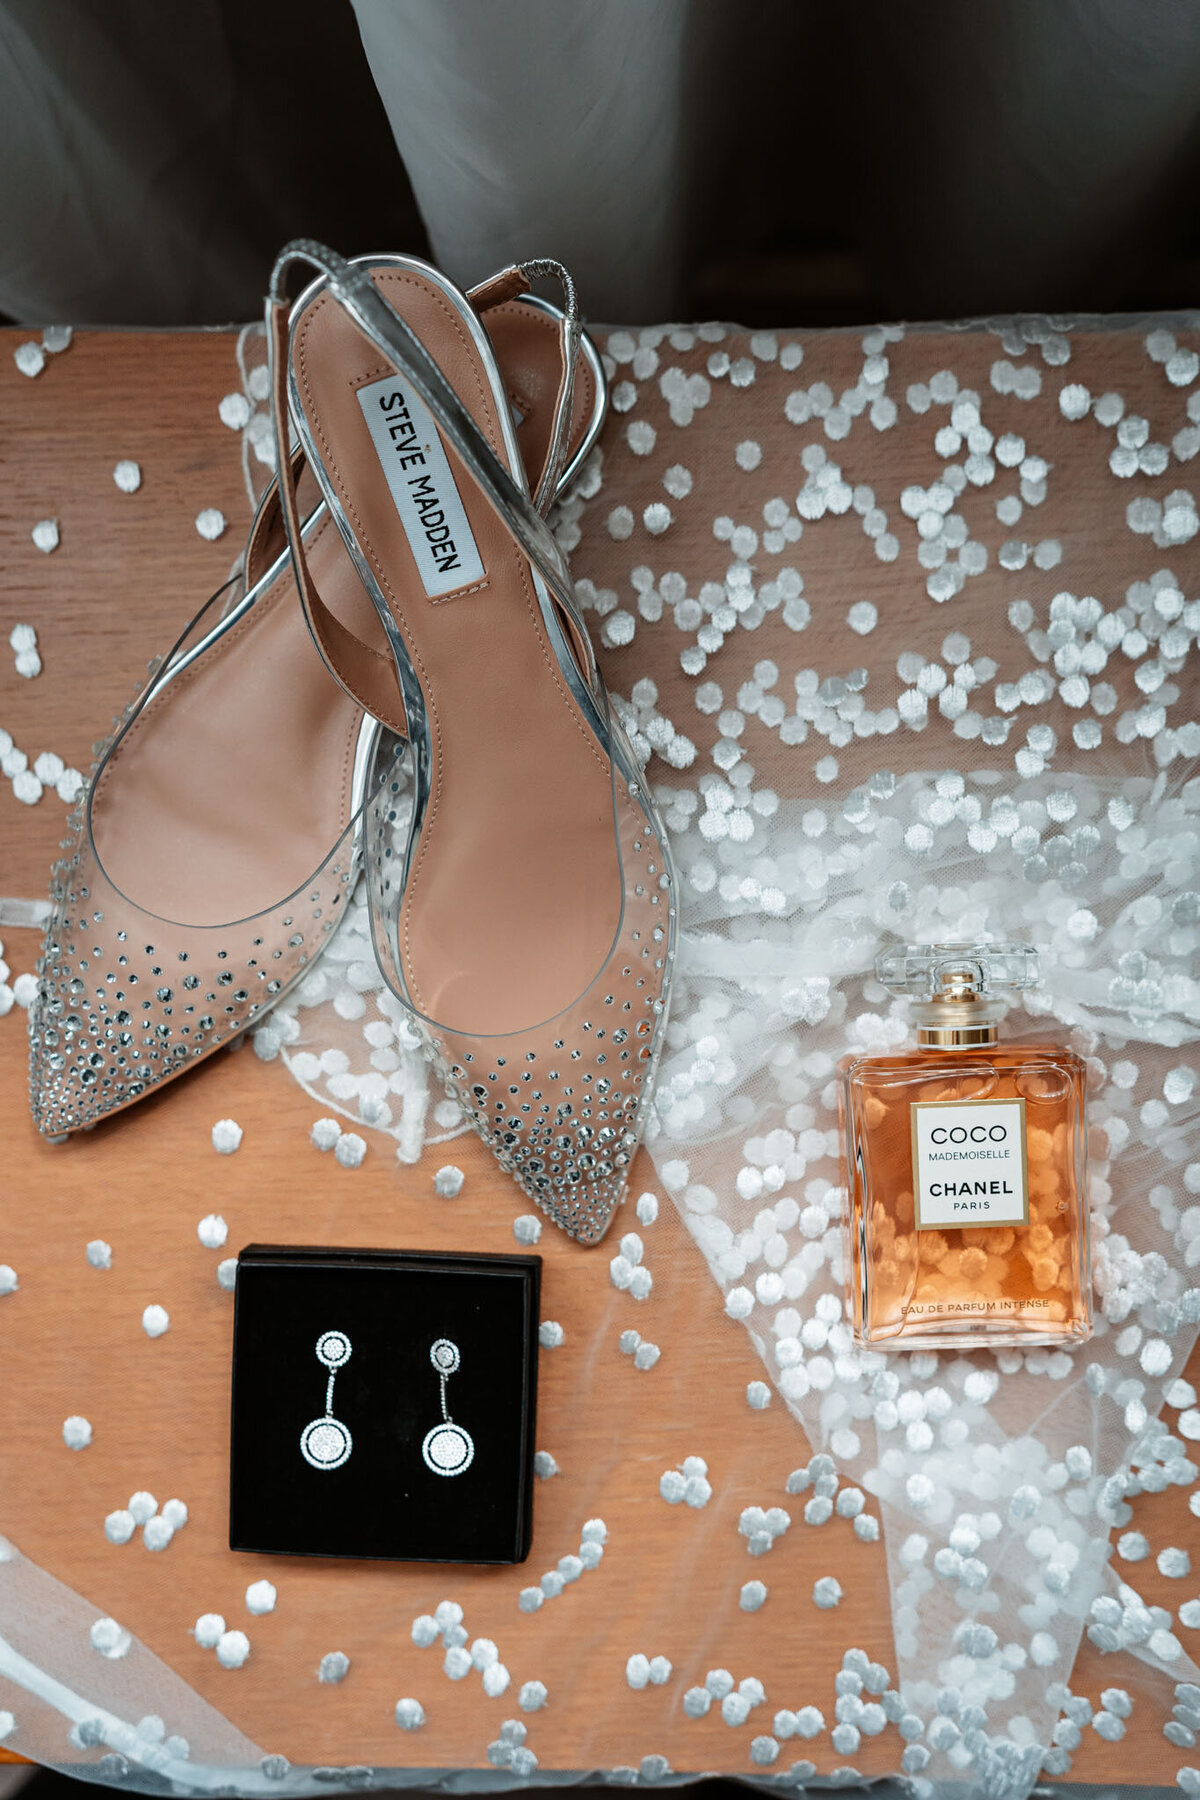 Emily's beautiful shoes and earrings being prepared for her wedding ceremony